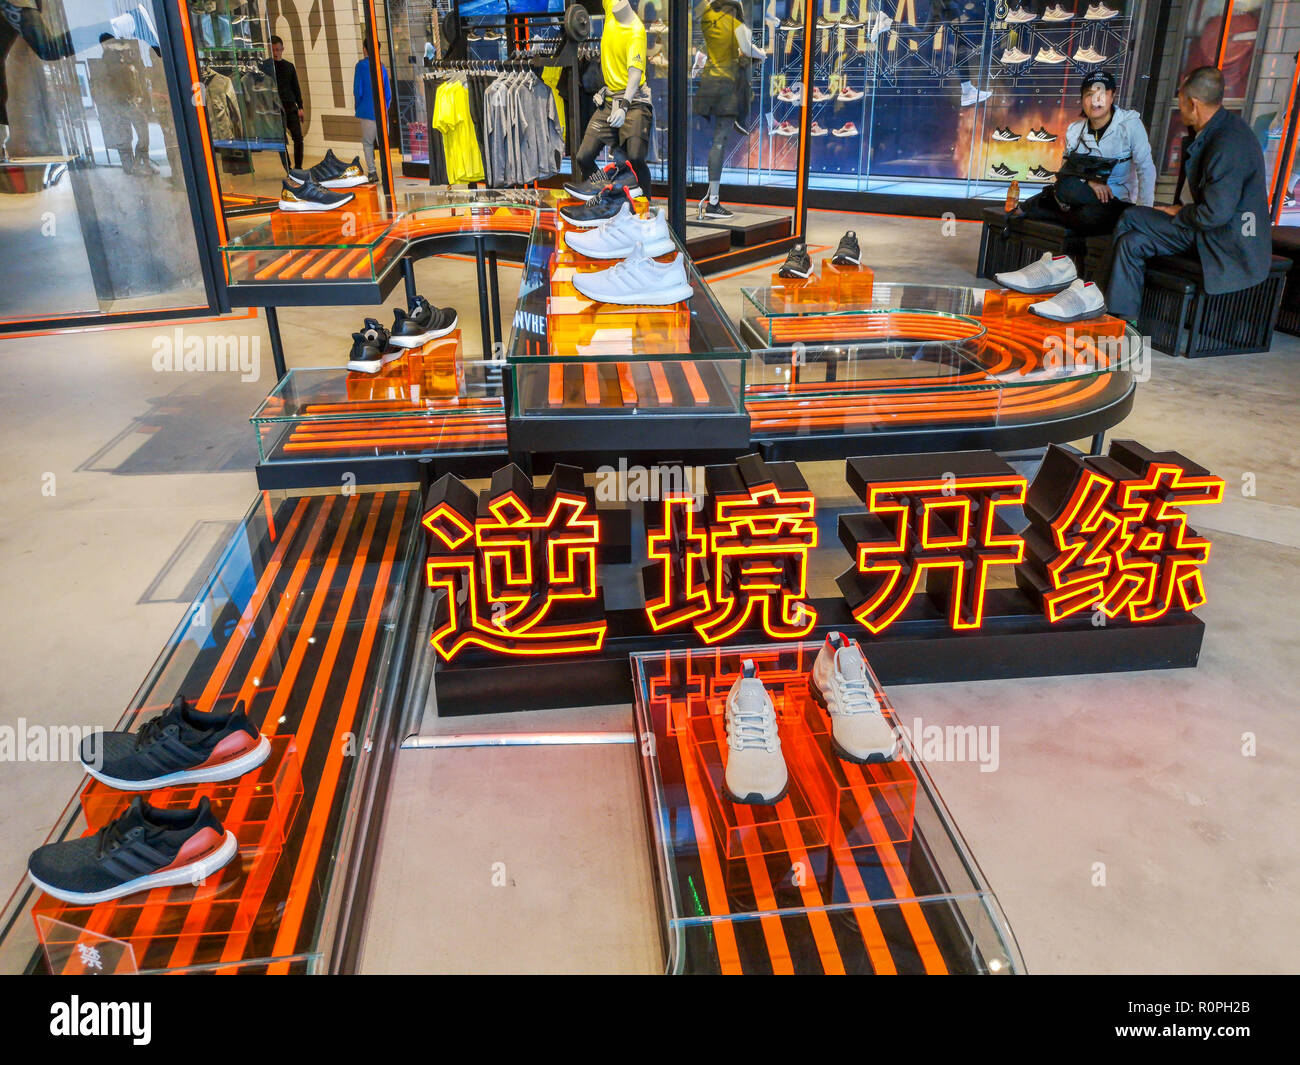 Shanghai, China. 6th Nov, 2018. Clothing and shoes on display at The Adidas  Brand Center Adidas Flagship Store opening in Shanghai. Credit: SIPA  Asia/ZUMA Wire/Alamy Live News Stock Photo - Alamy